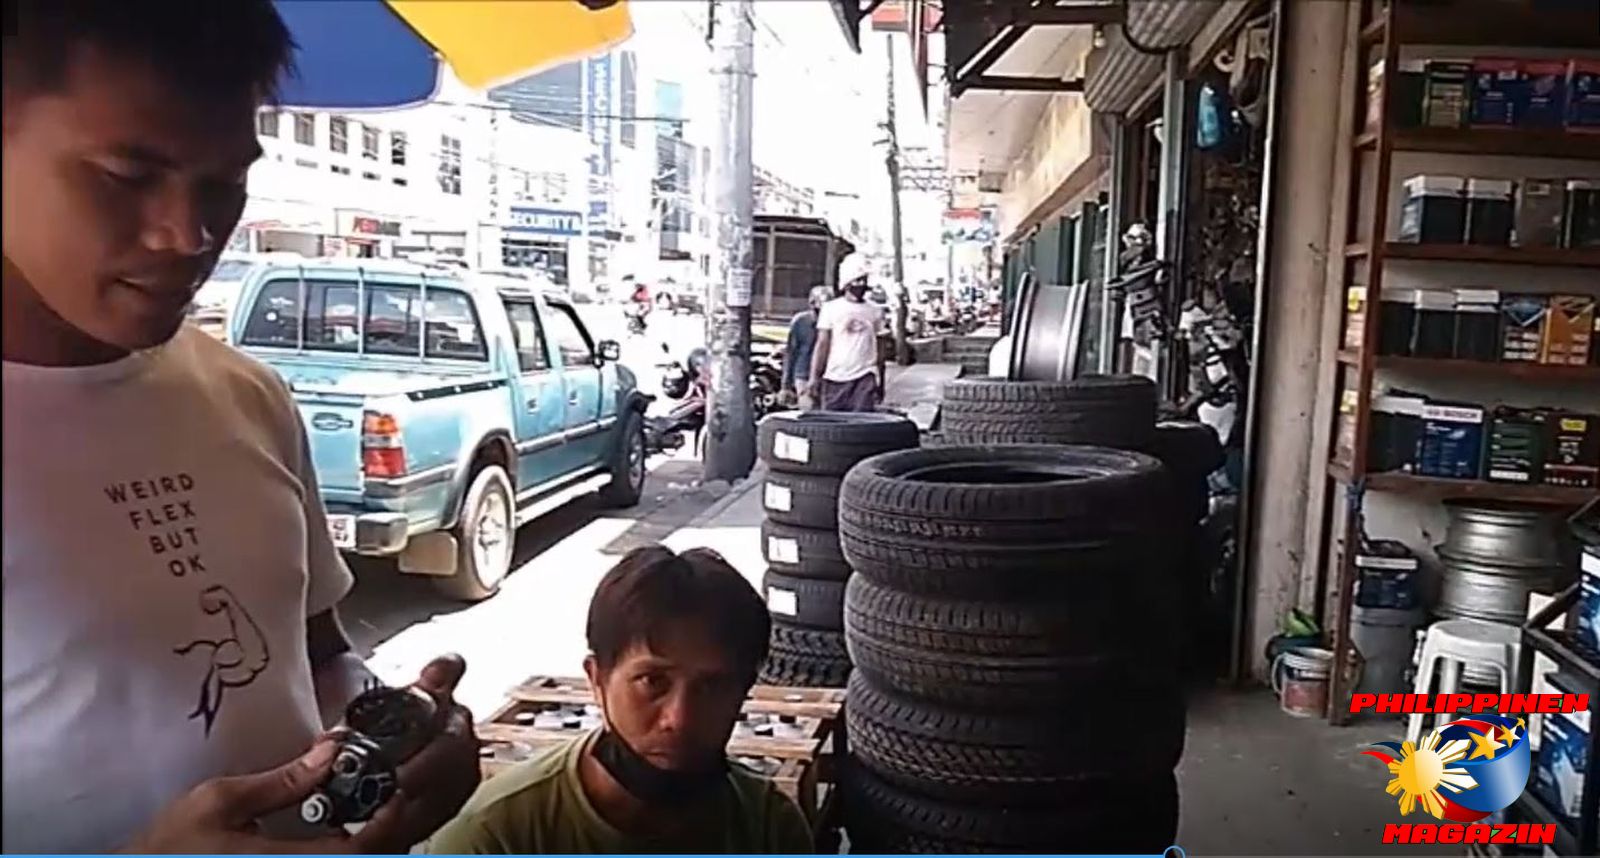 SIGHTS OF CAGAYAN DE ORO CITY & NORTHERN MINDANAO - OSMENA STREET - The place for used and new vehicle parts